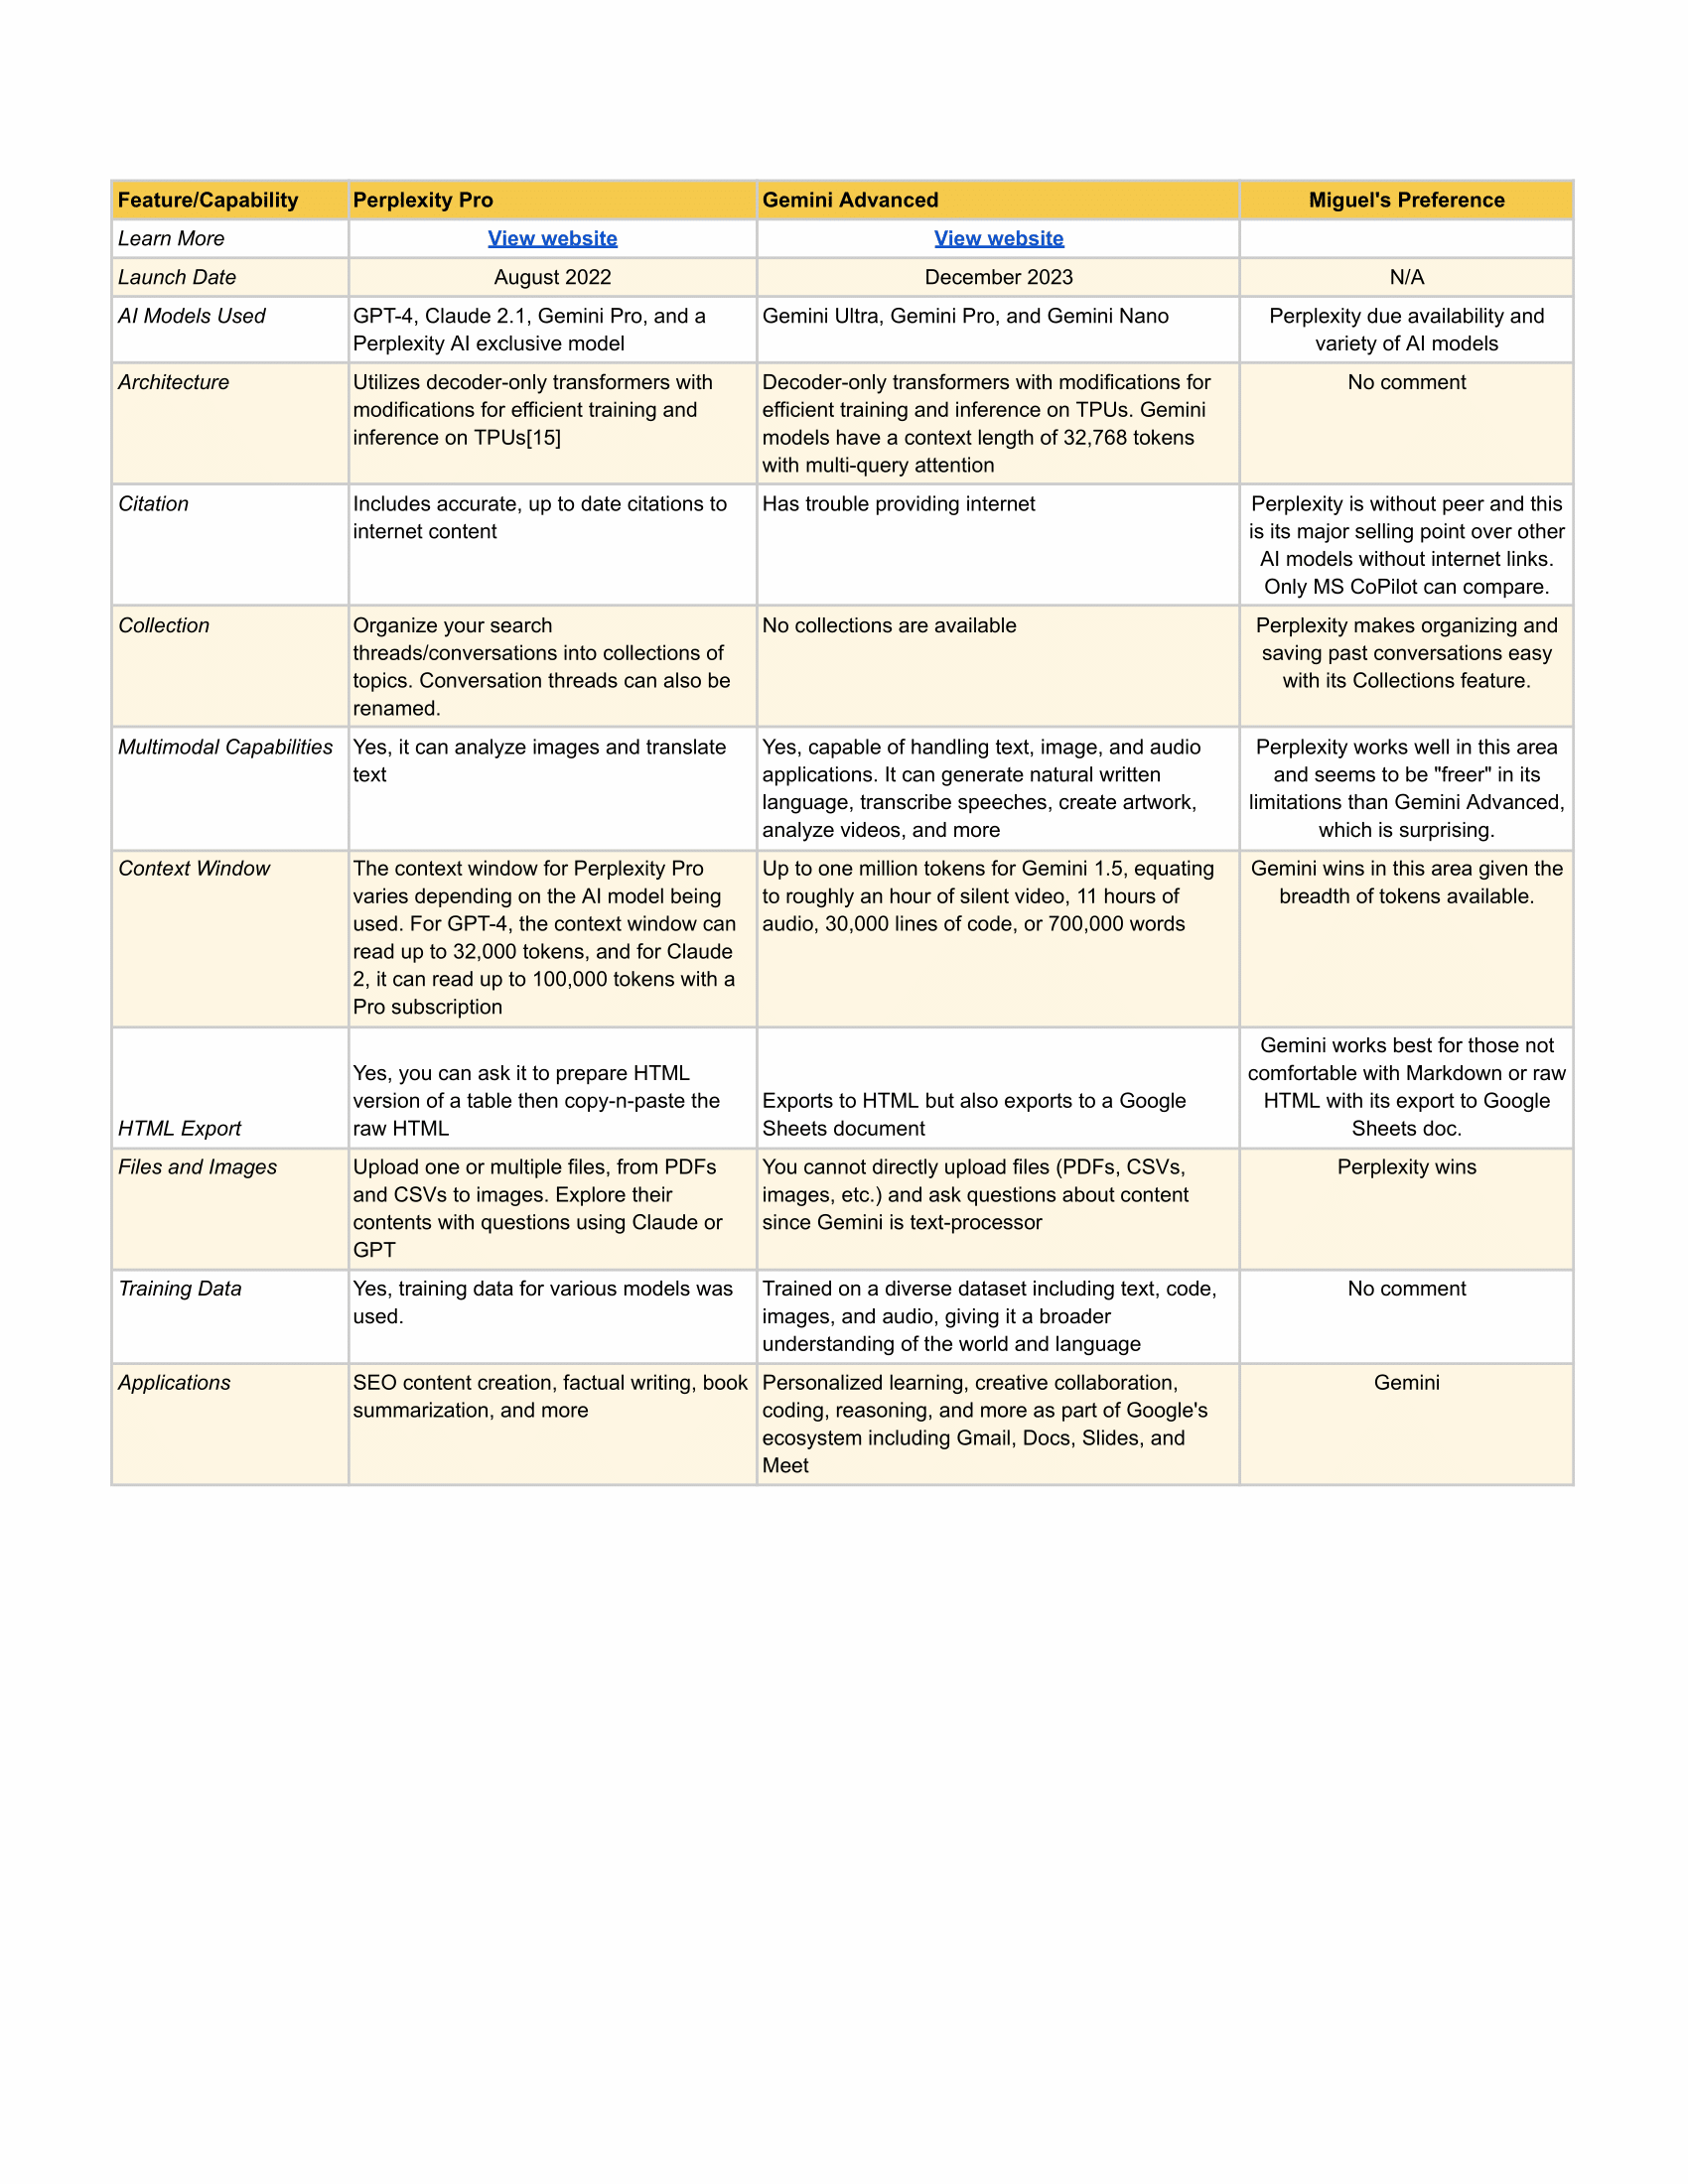 A detailed chart of similarities and differences between Gemini and Perplexity.